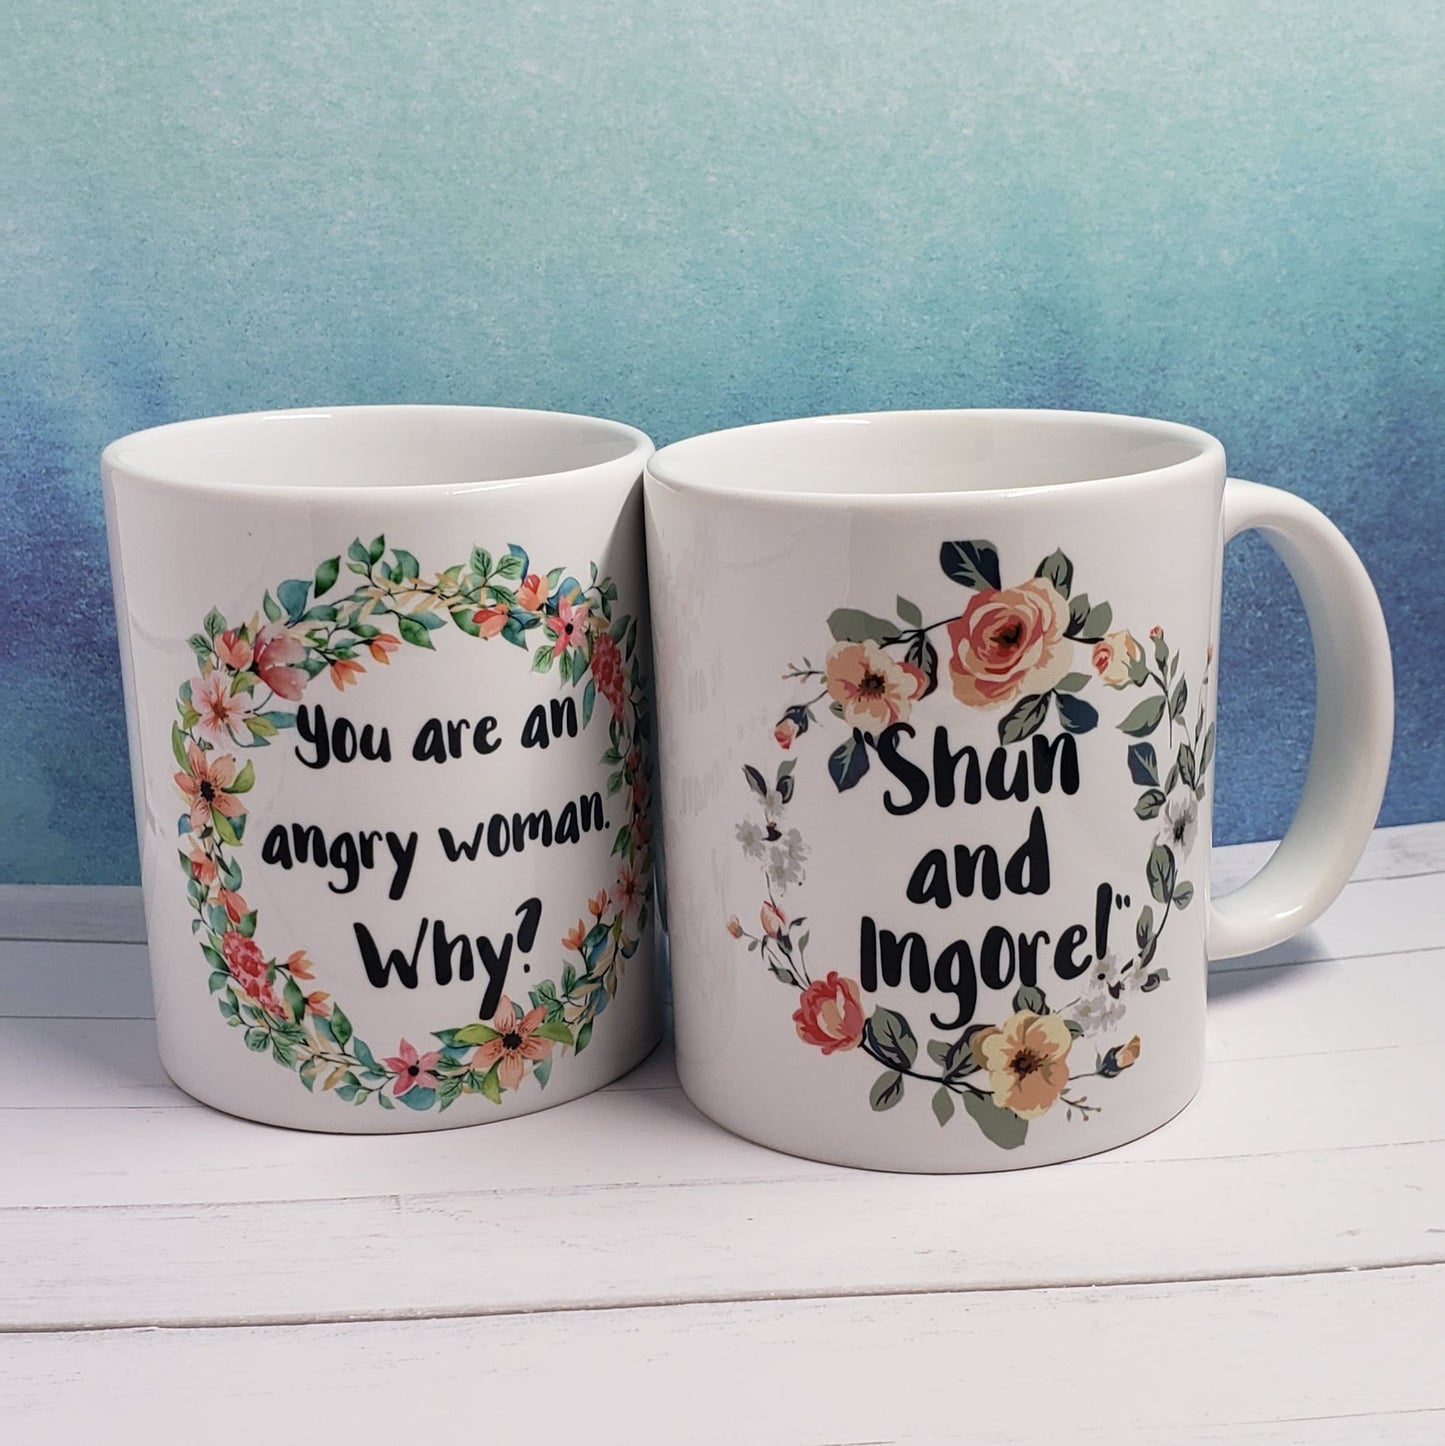 Online interaction mugs - 3 choices